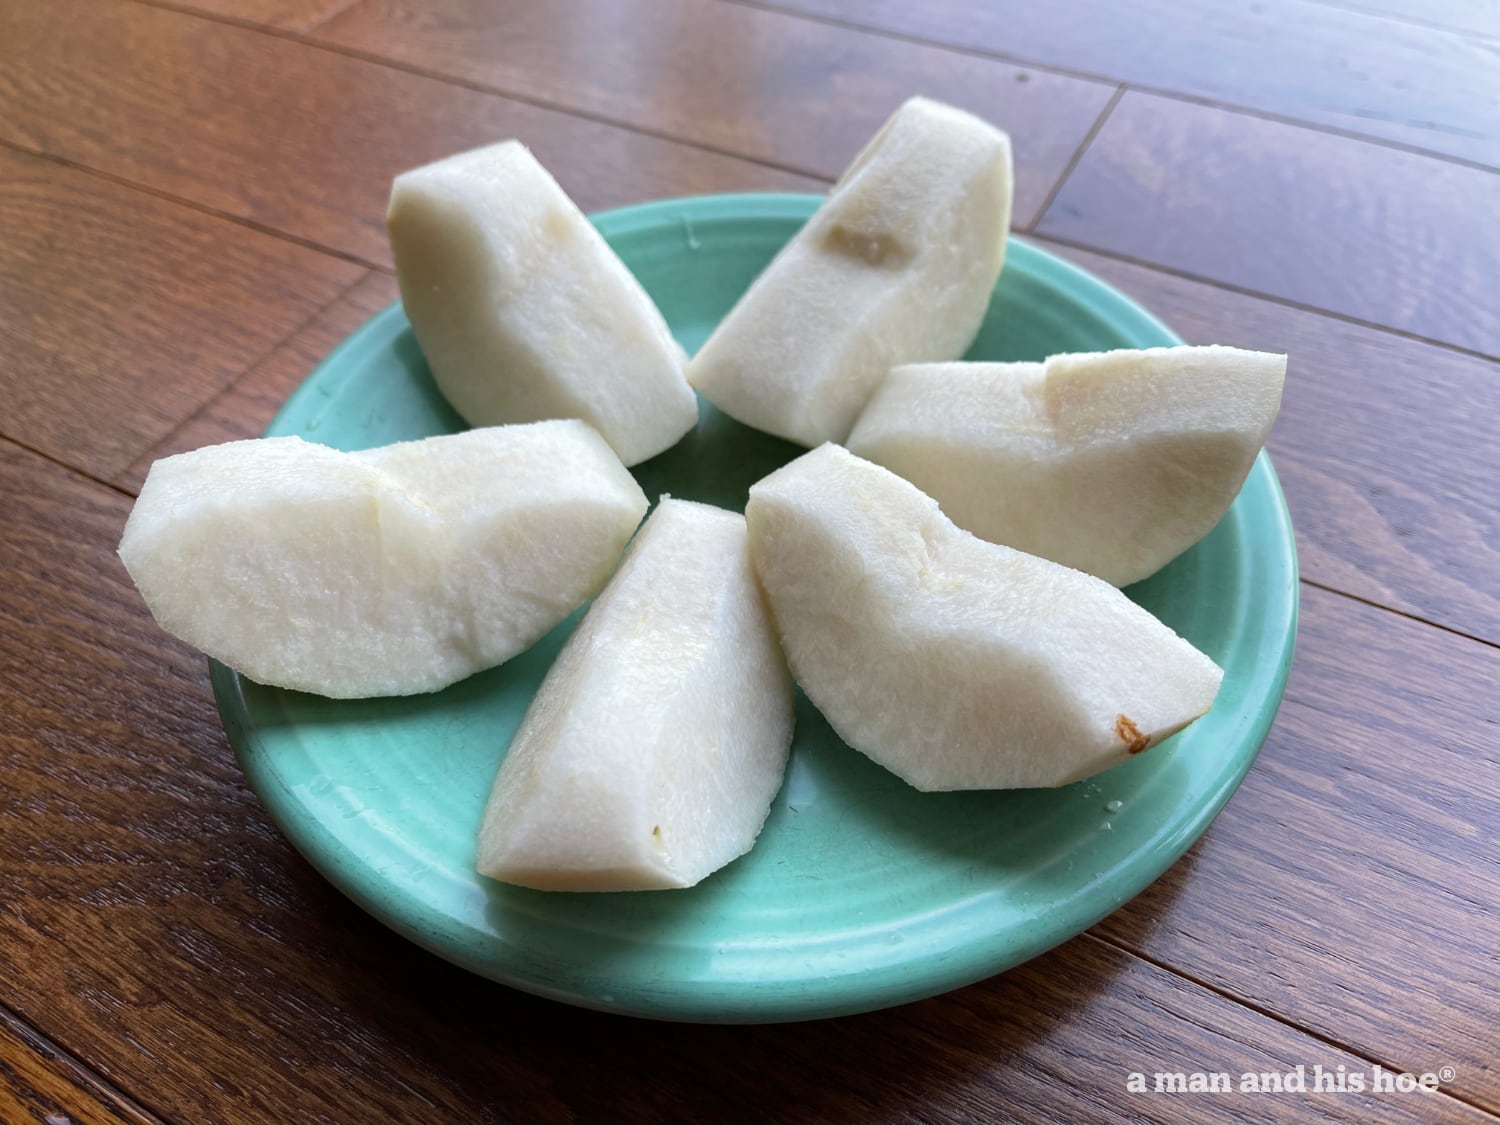 Pear slices